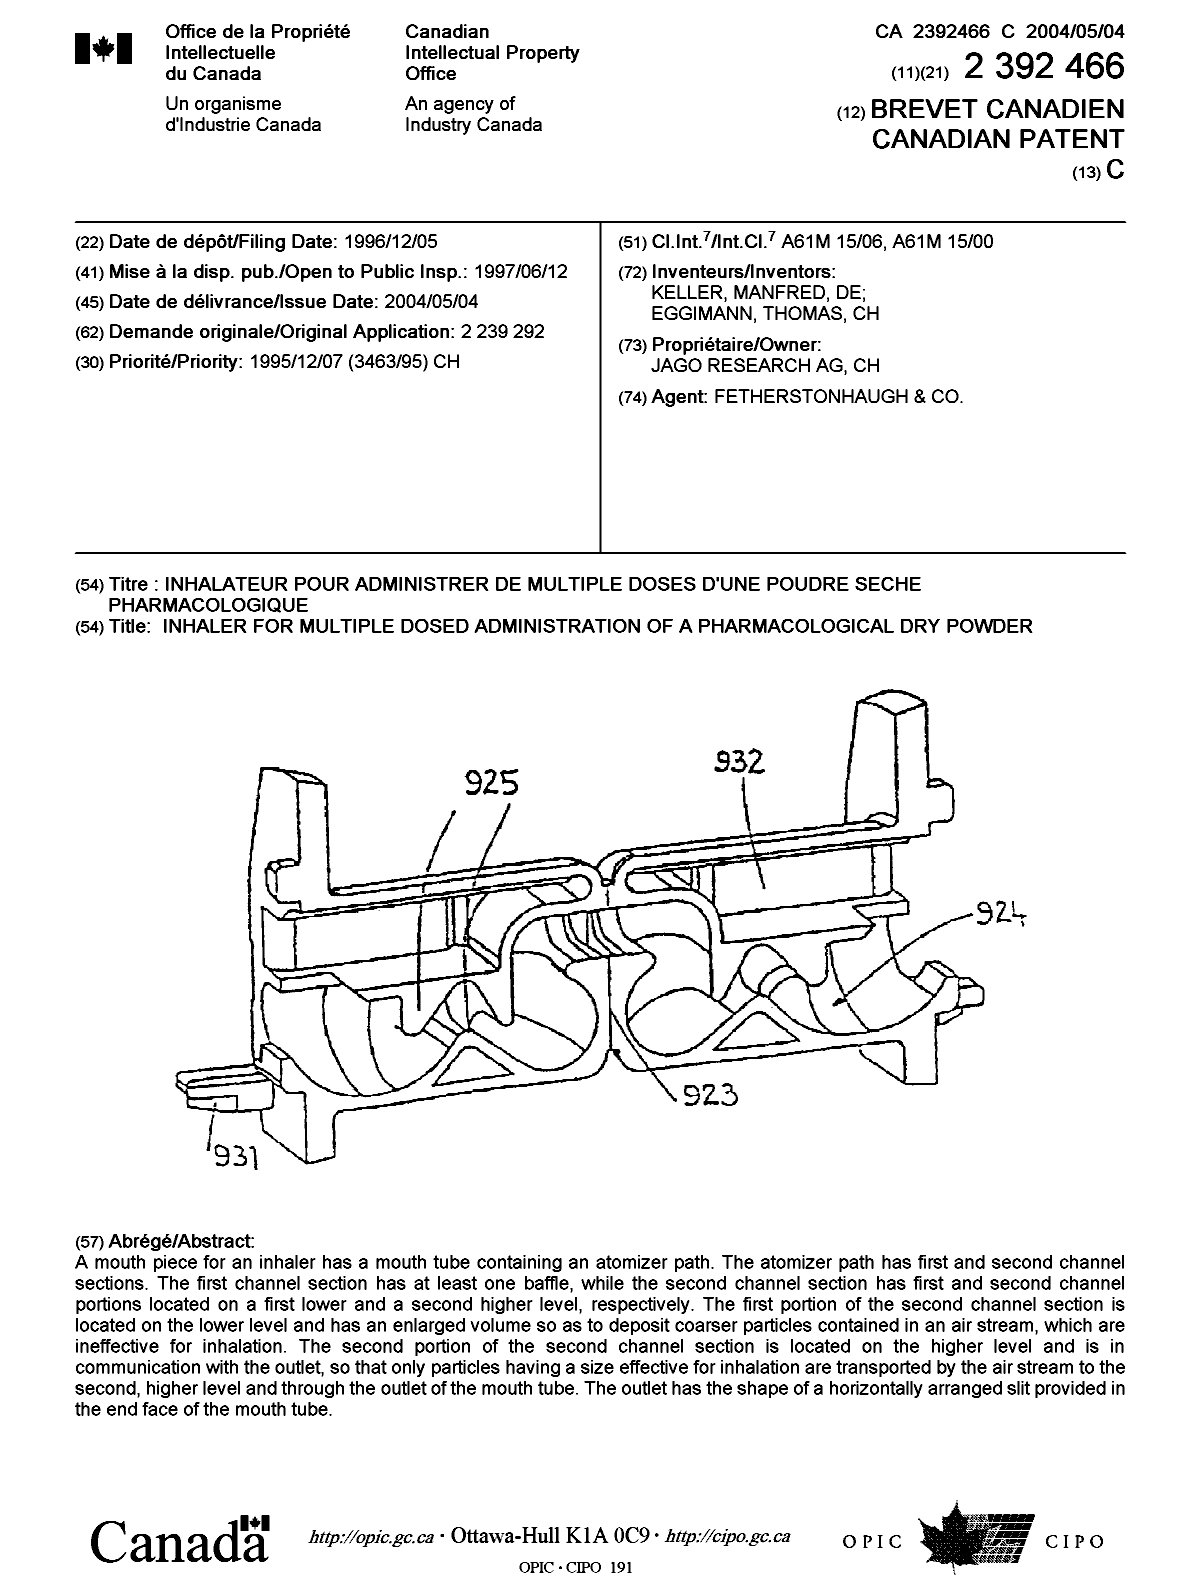 Canadian Patent Document 2392466. Cover Page 20040405. Image 1 of 1